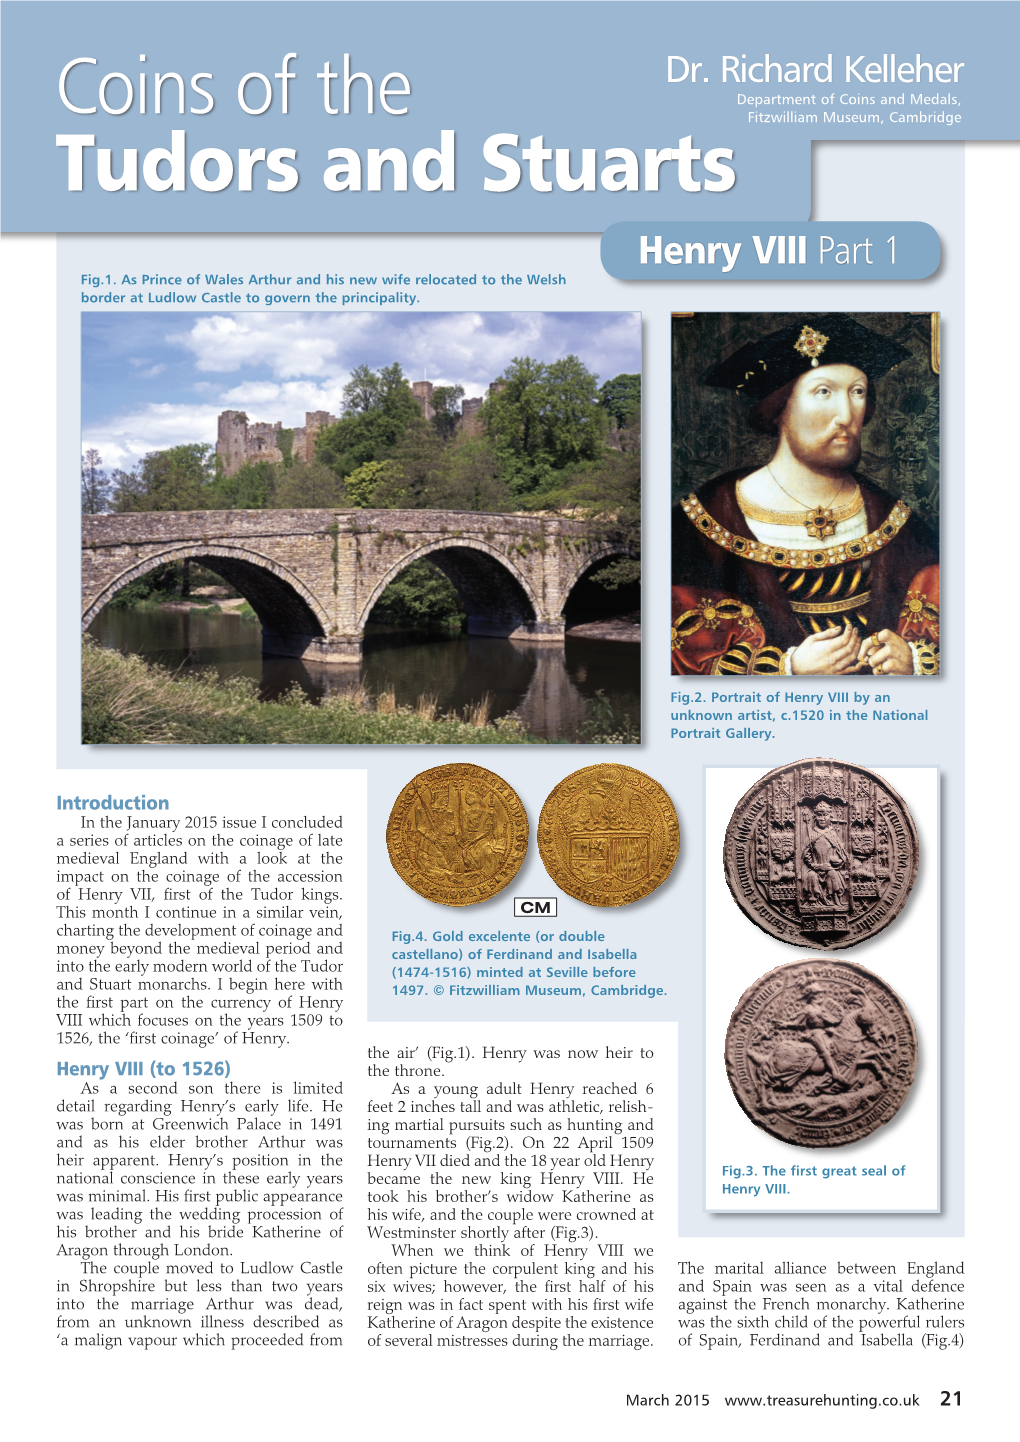 Coins of Henry VIII